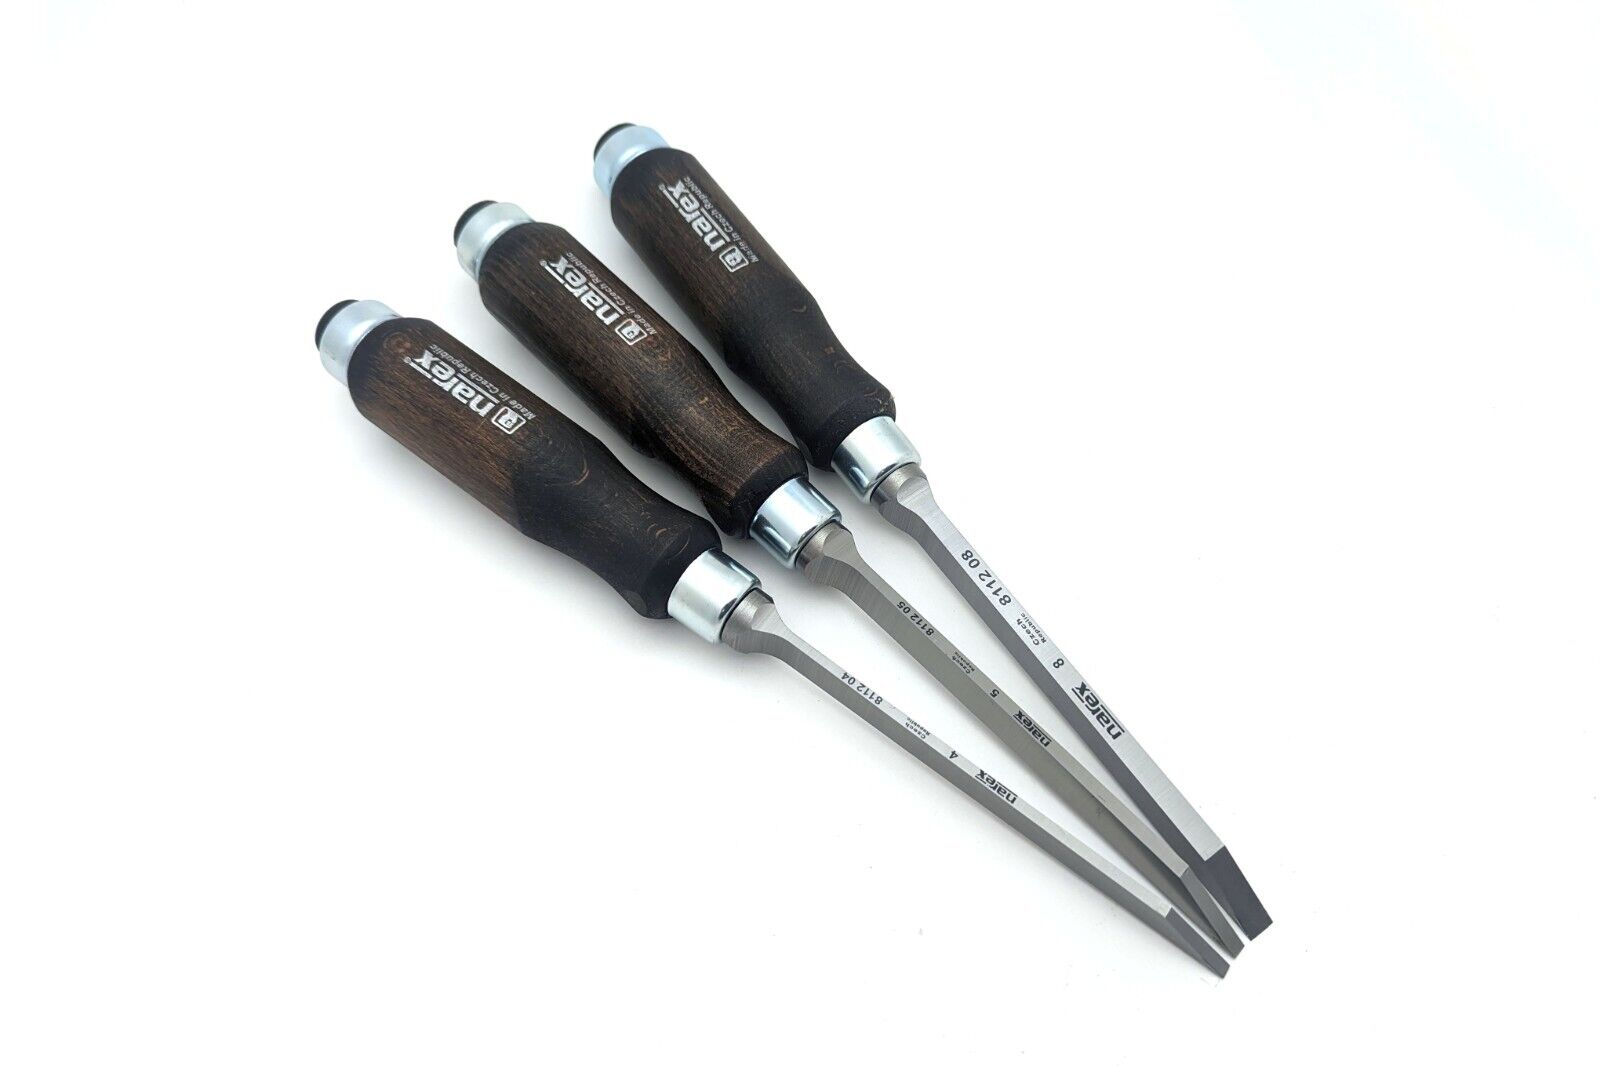 Narex (Made in Czech Republic) 3 pc set 4mm, 5mm, 8mm Mortise Chisels